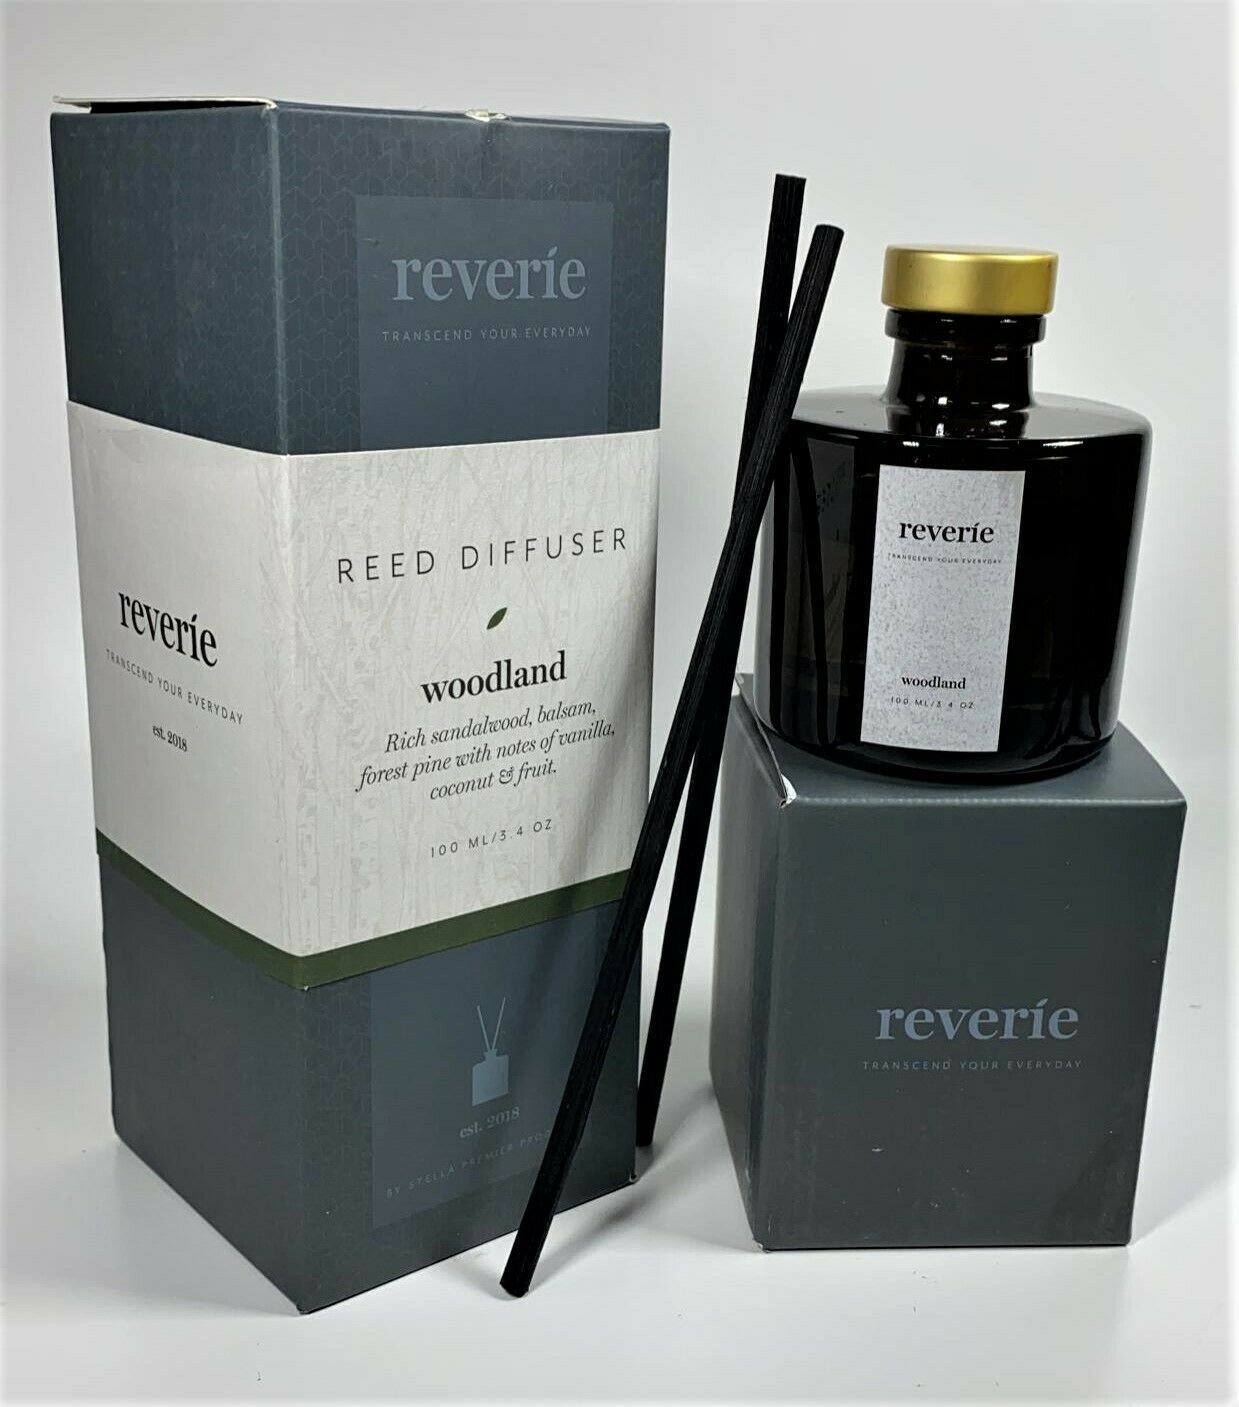 Reverie Reed Diffuser, Fragrances Essential Oil Aromatherapy, Woodland 100ml